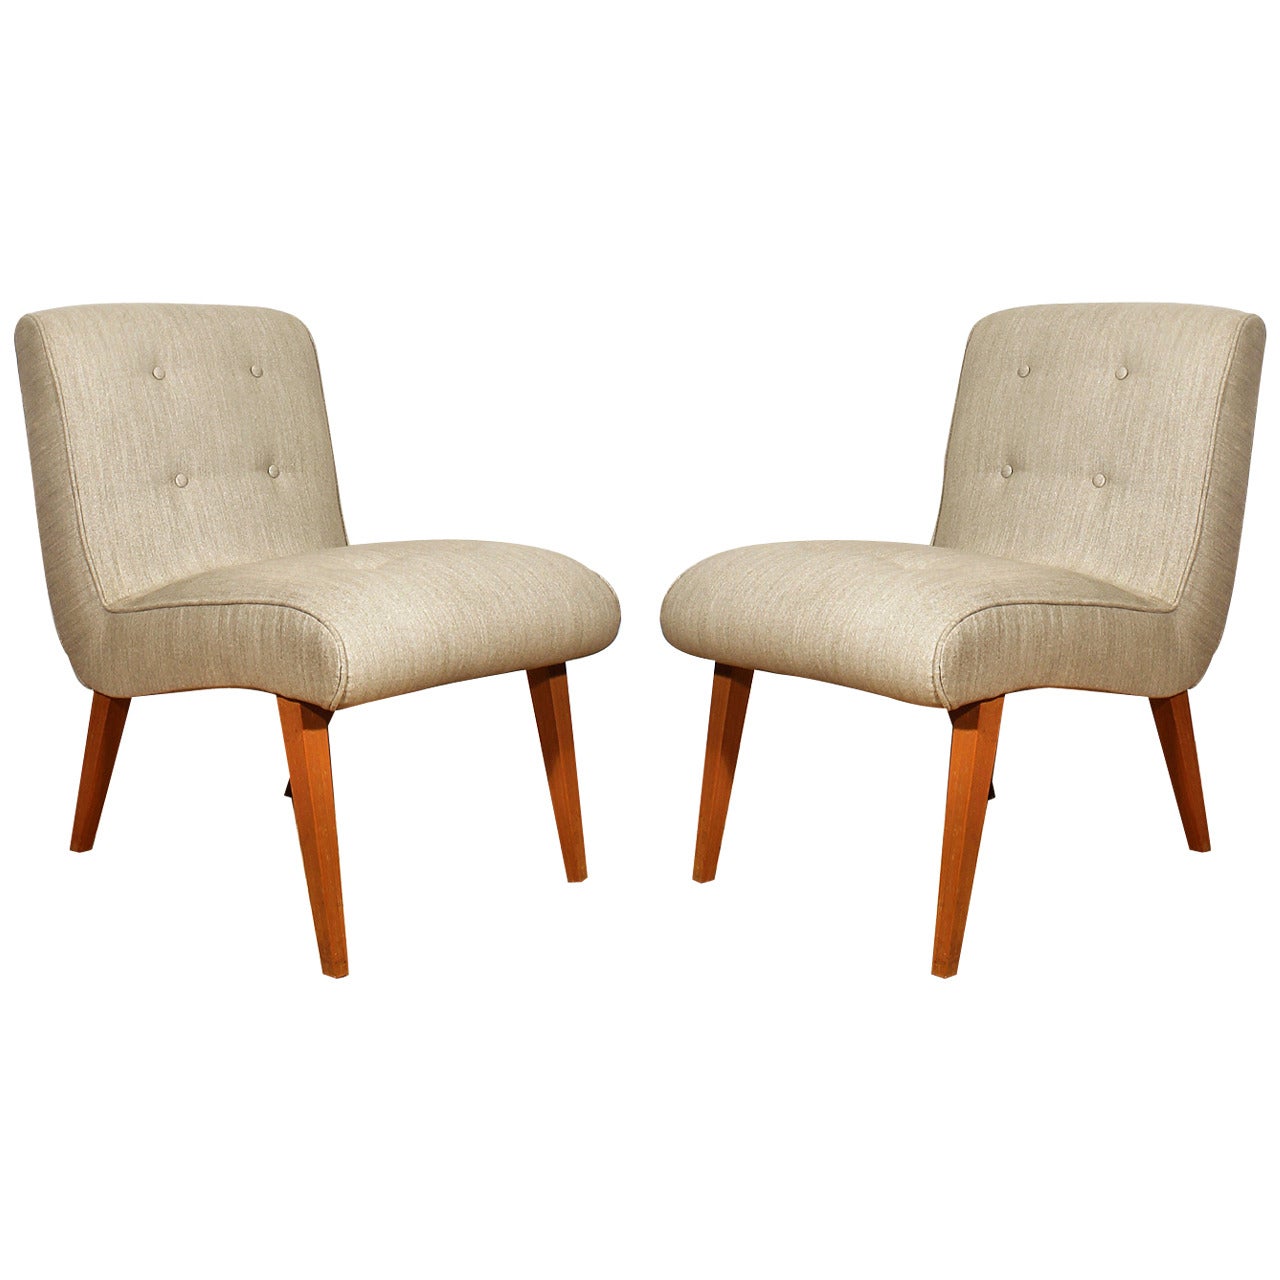 Pair of Mid-Century Modern Vostra Chairs by Walter Knoll - Germany